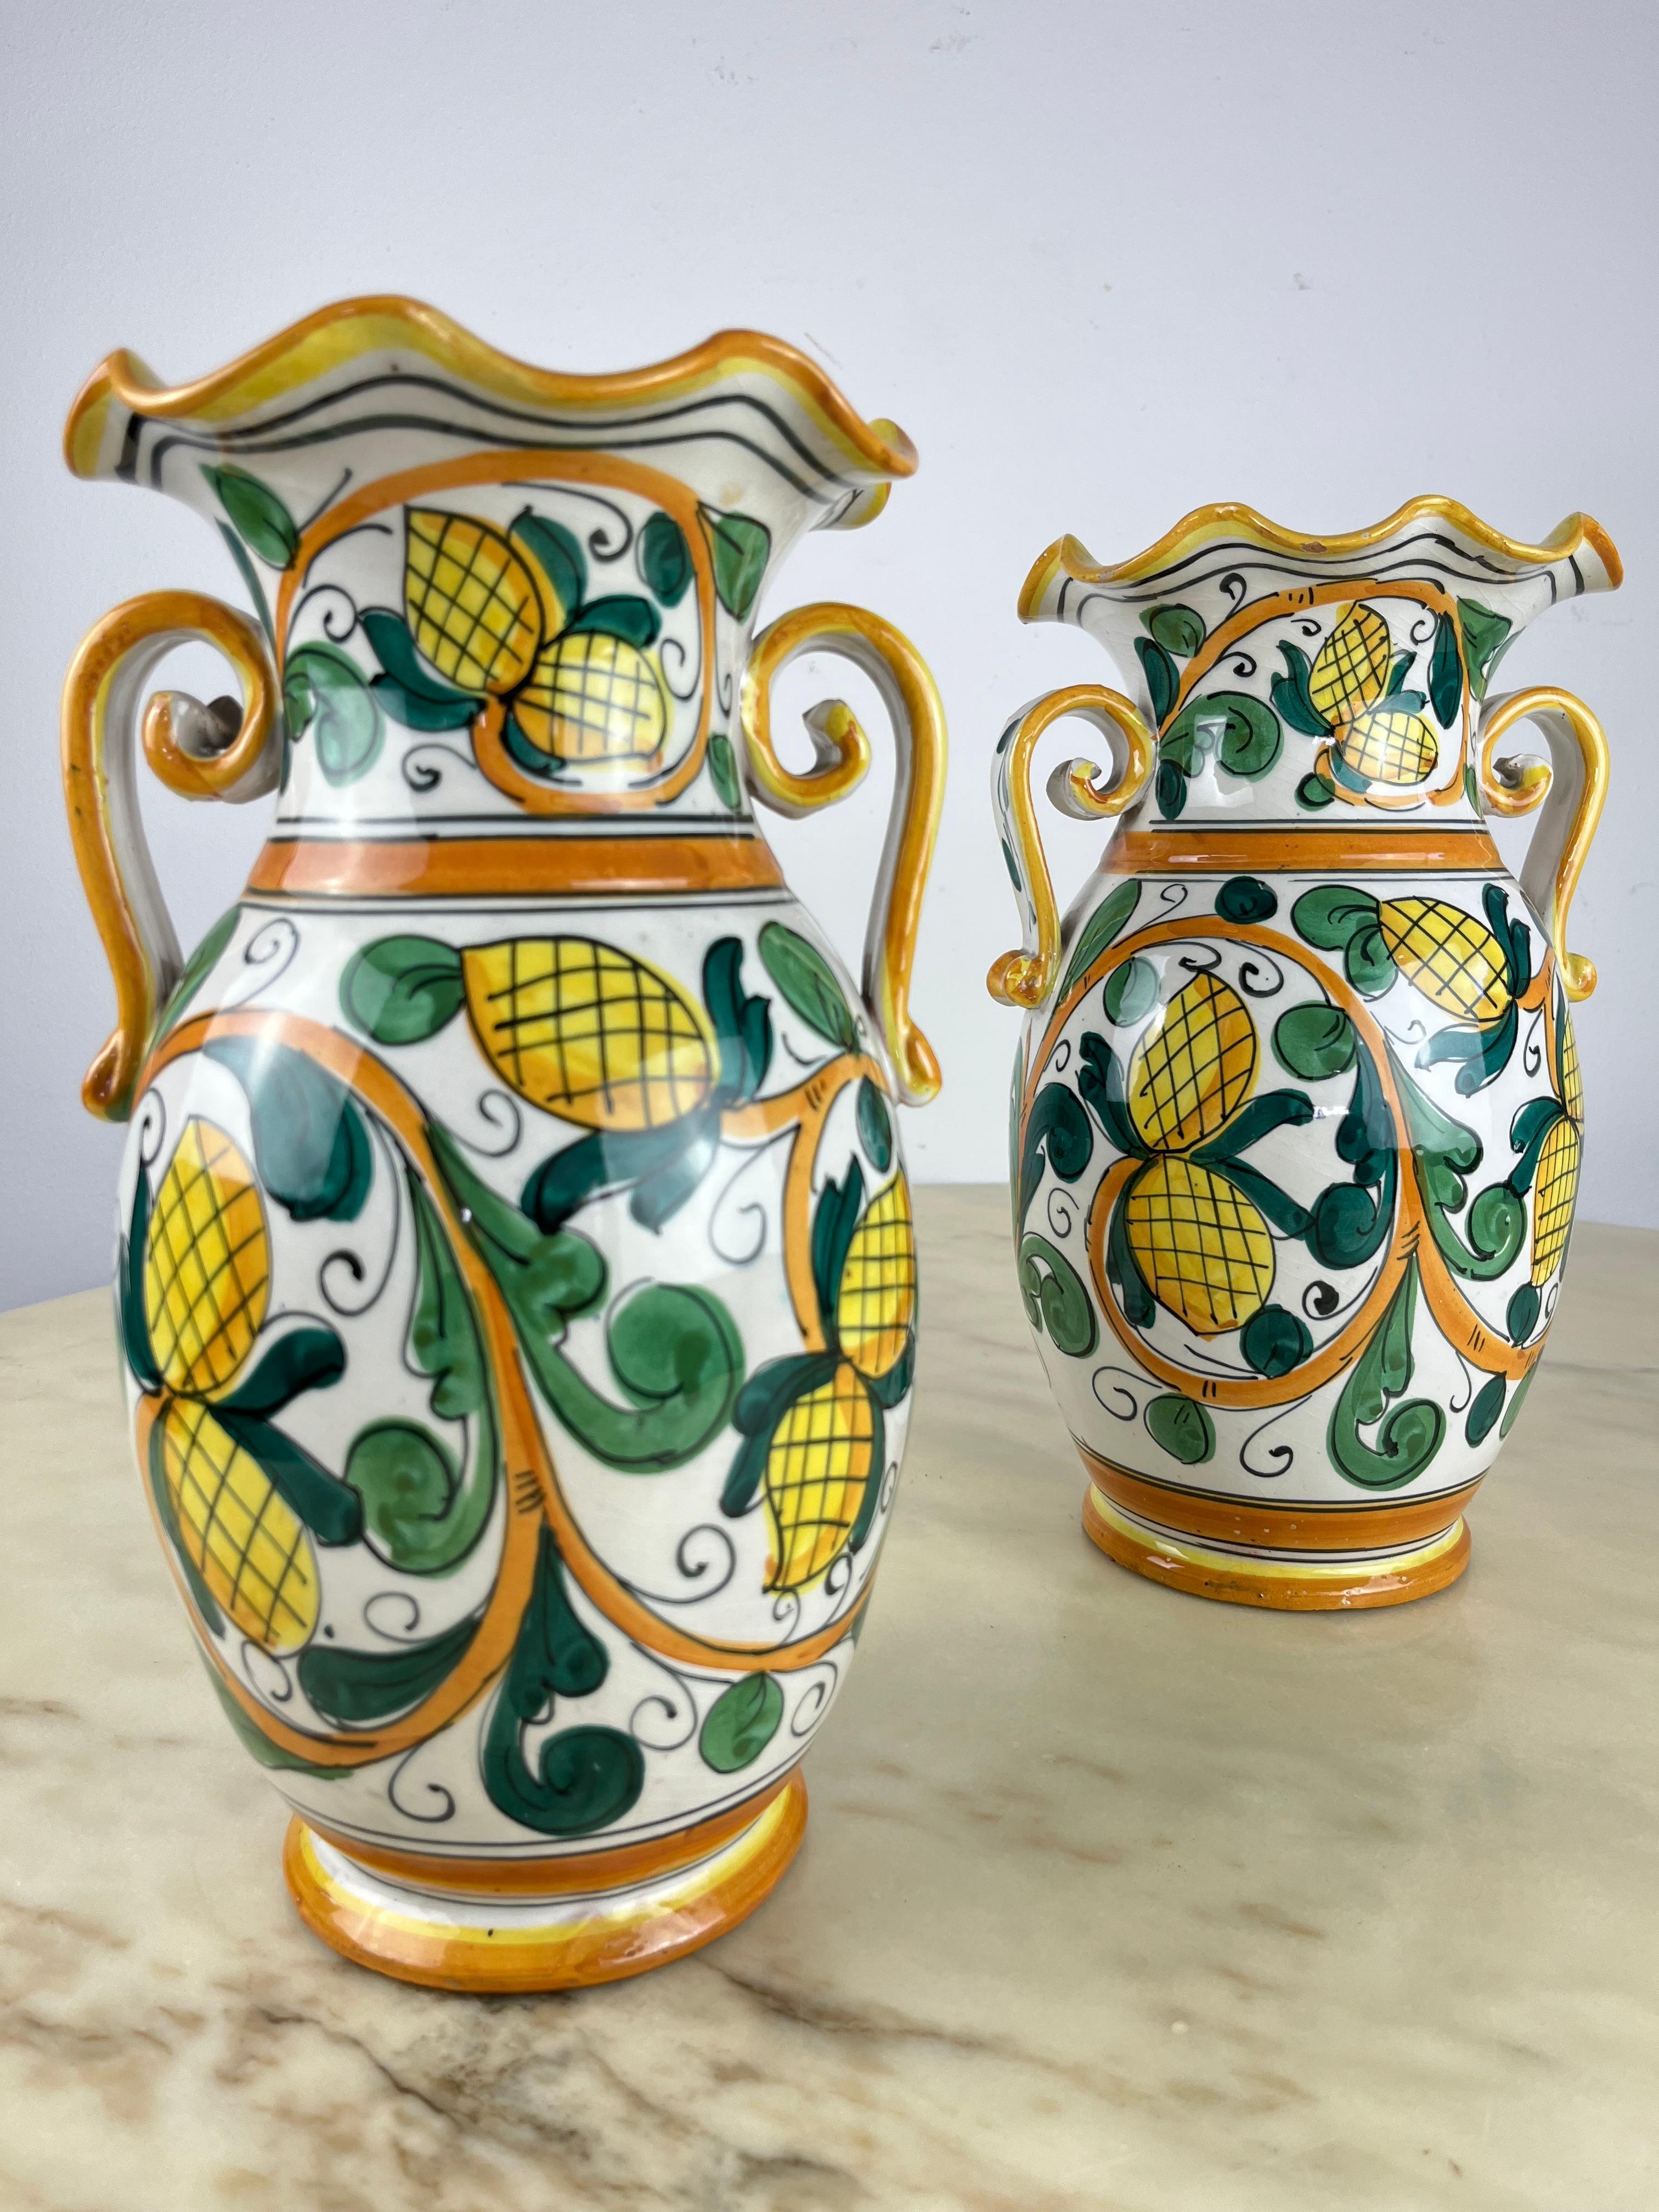 Pair of hand-painted and hand-crafted ceramic amphorae Caltagirone, Italy, 1980s
Purchased by my grandparents, they are 31 cm high. Hand painted Sicilian lemons. Intact and in excellent condition.